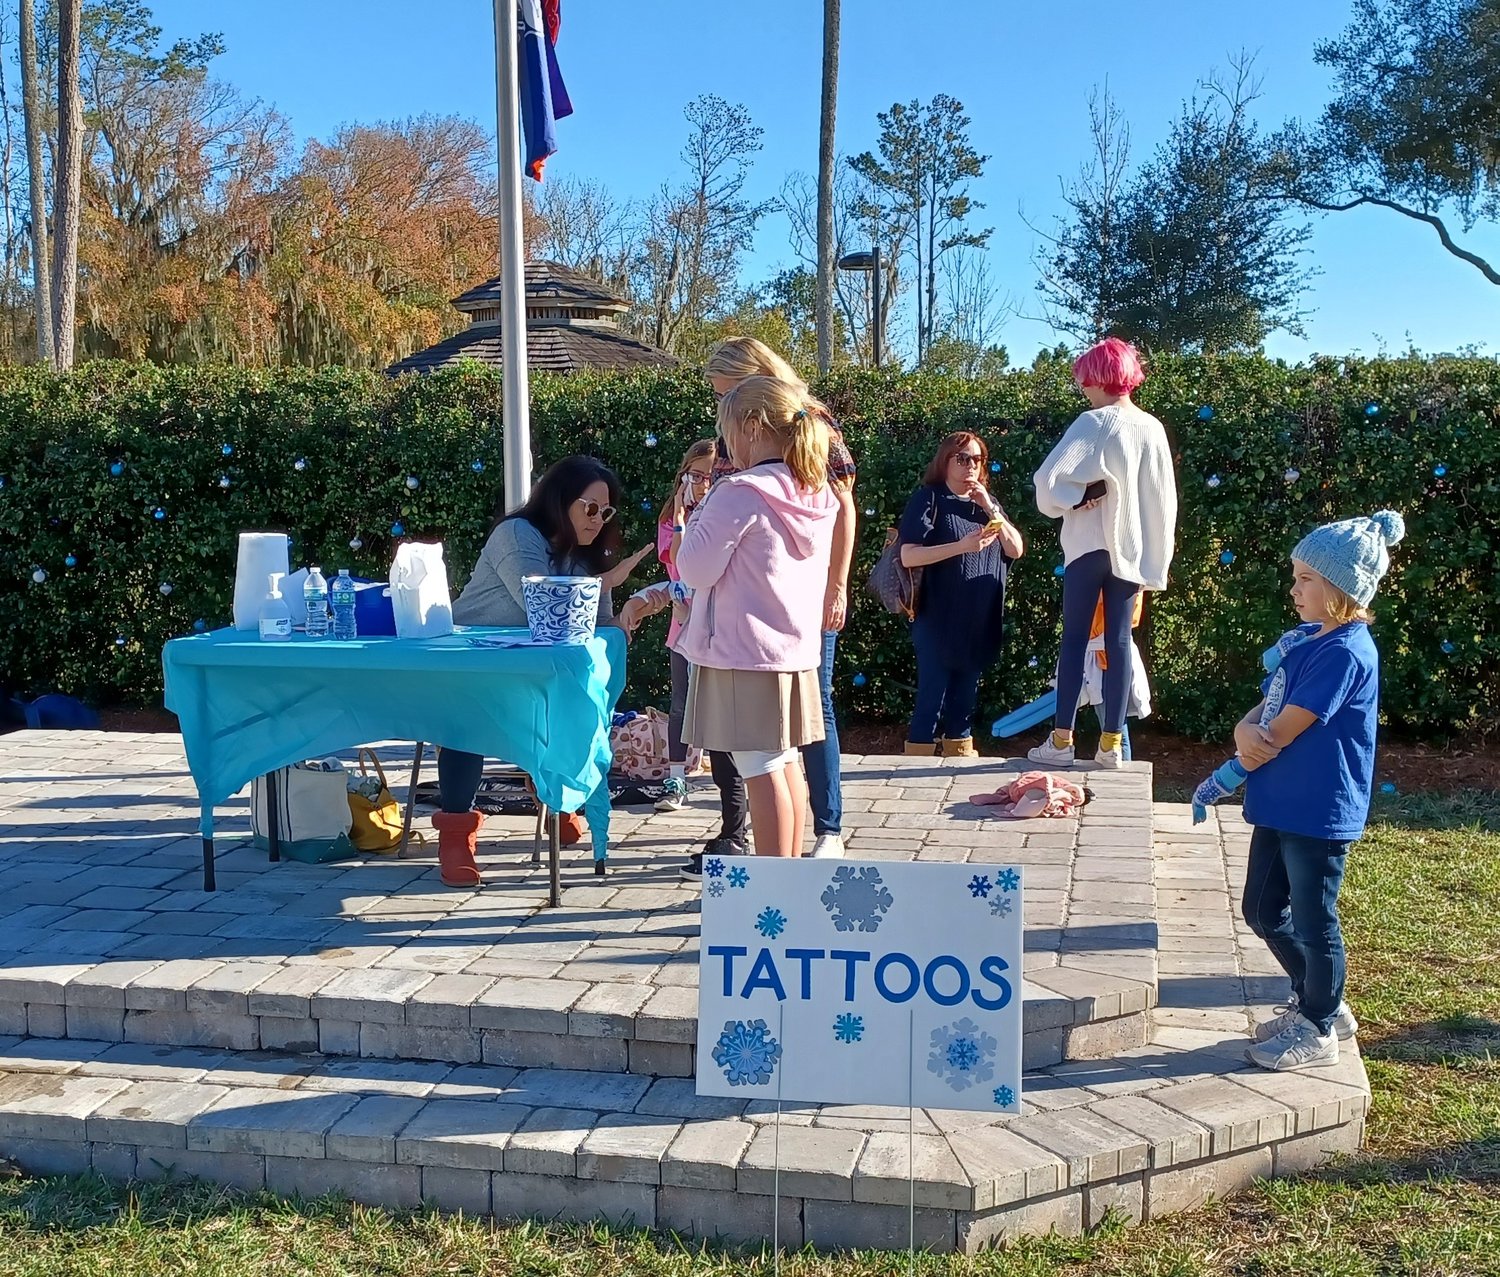 Tattoos, face-painting and balloon art added to the fun.